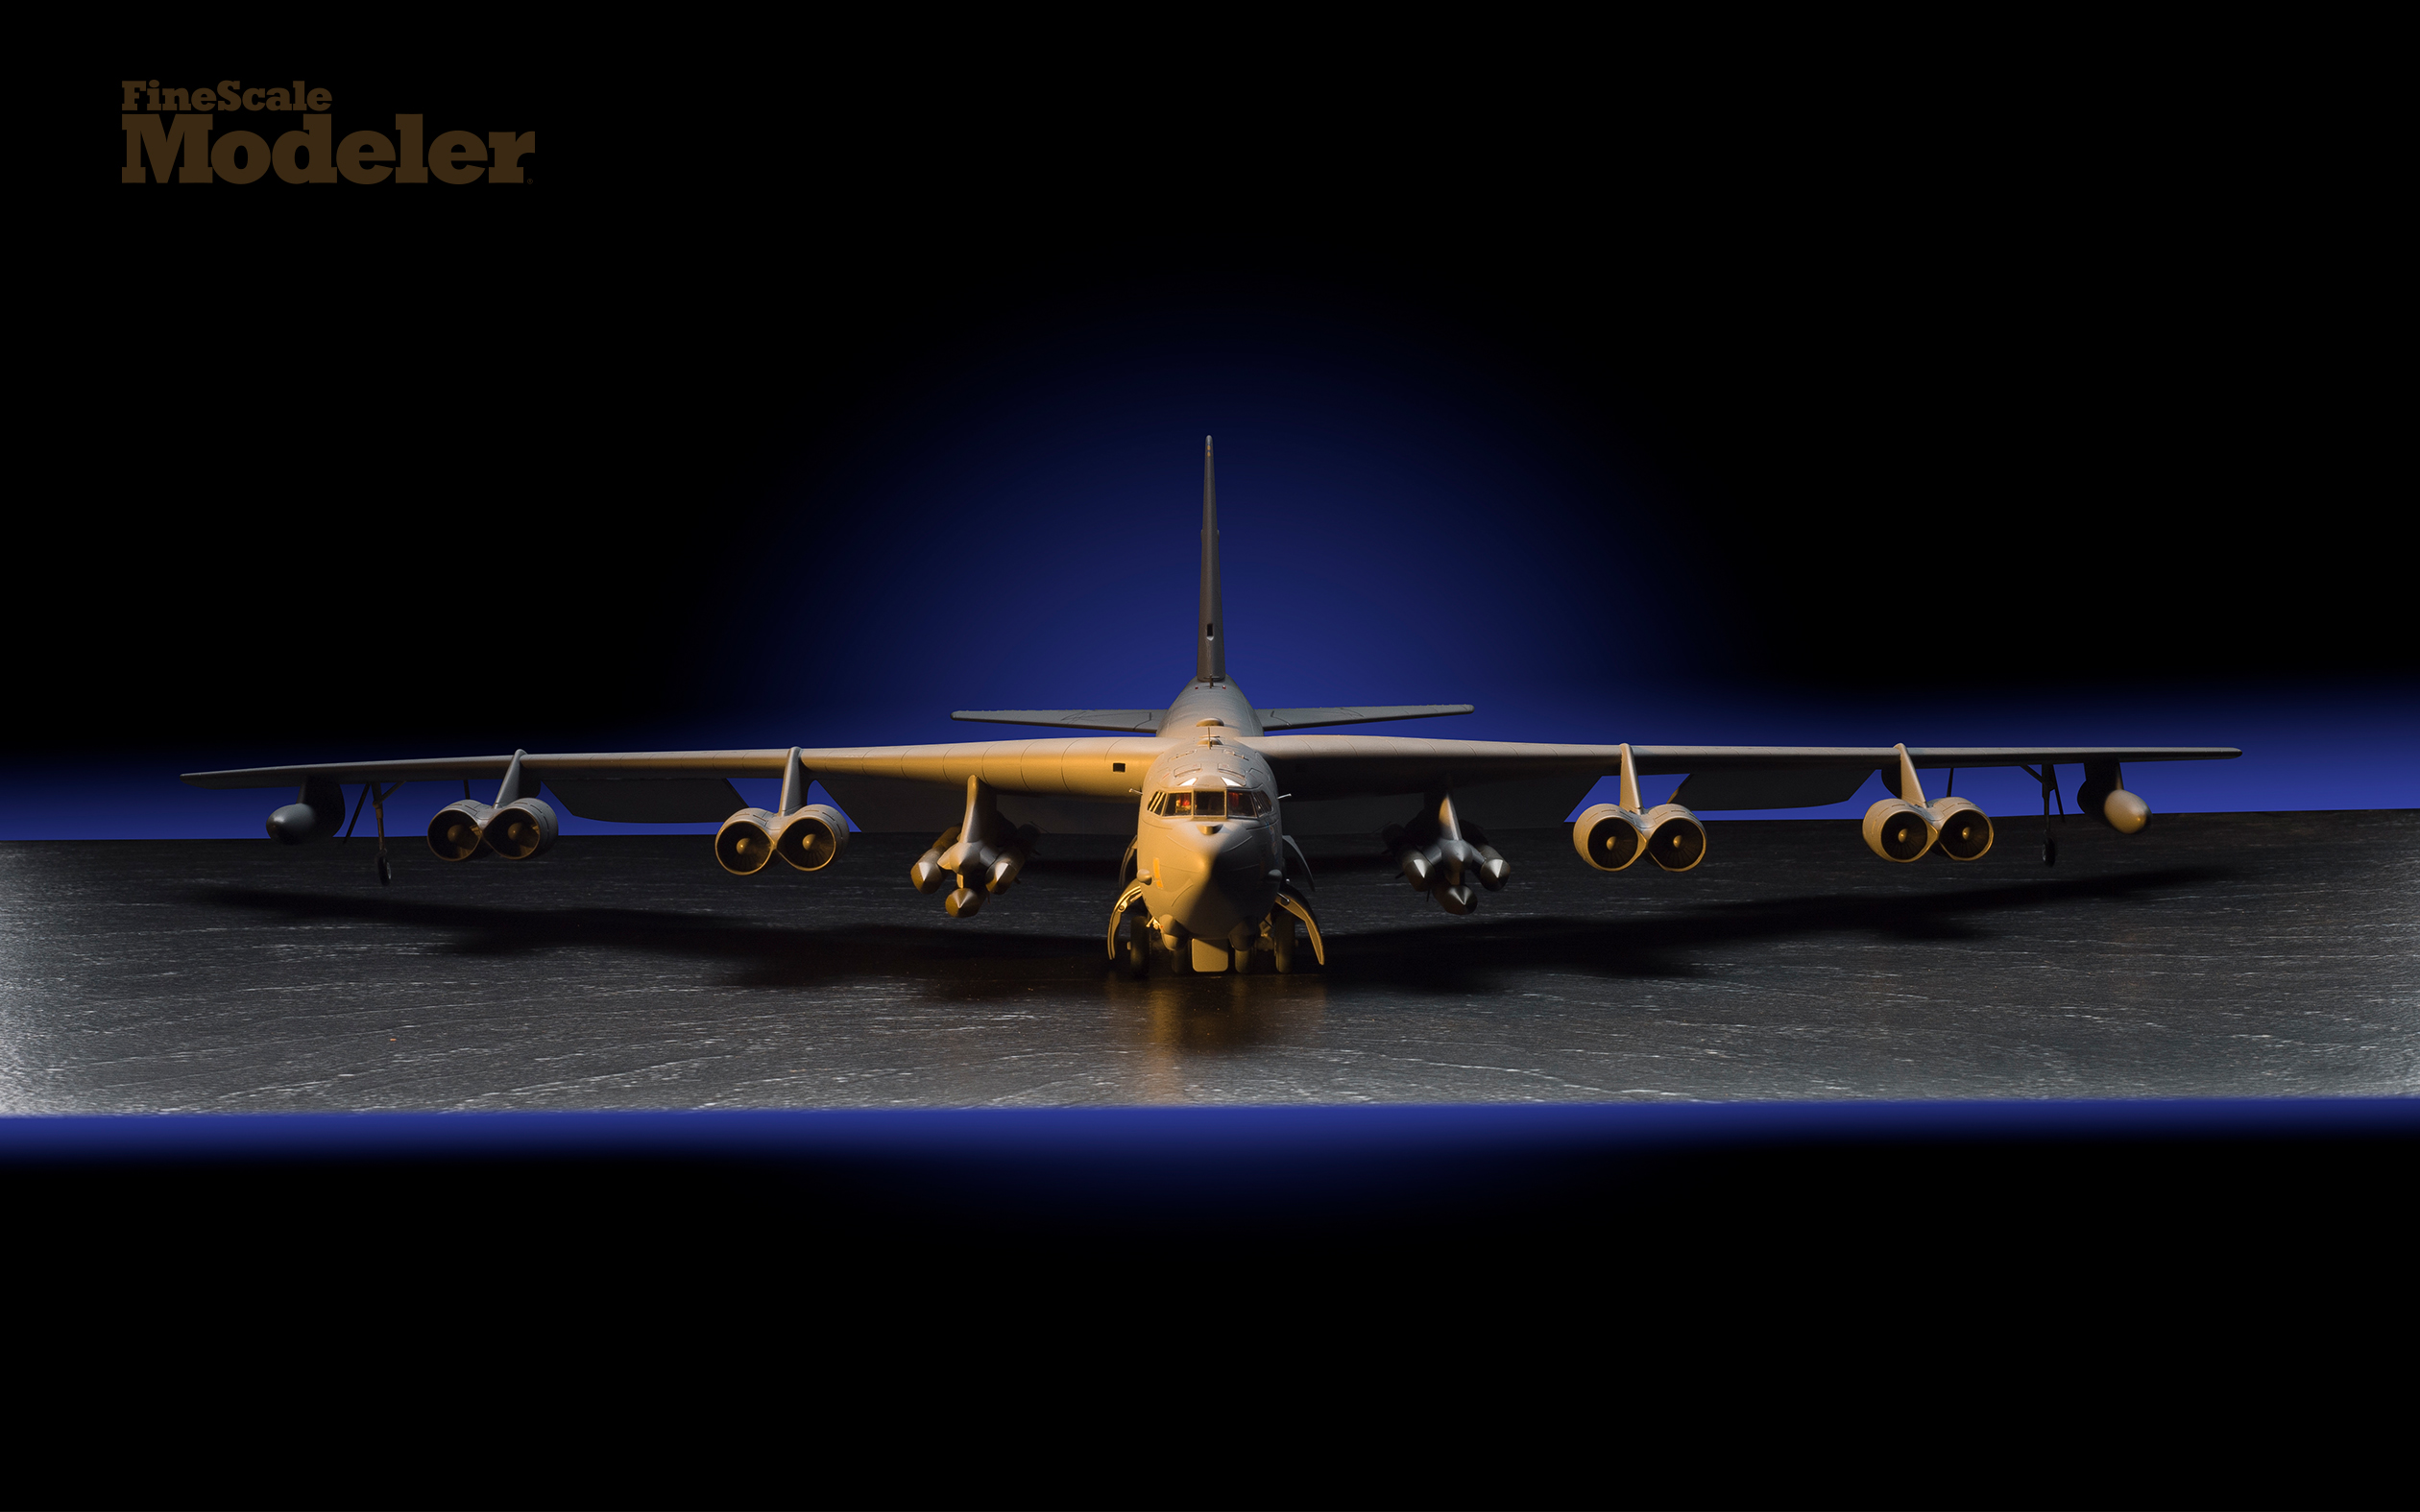 Free wallpaper of Modelcollects B 52H Stratofortress FineScale